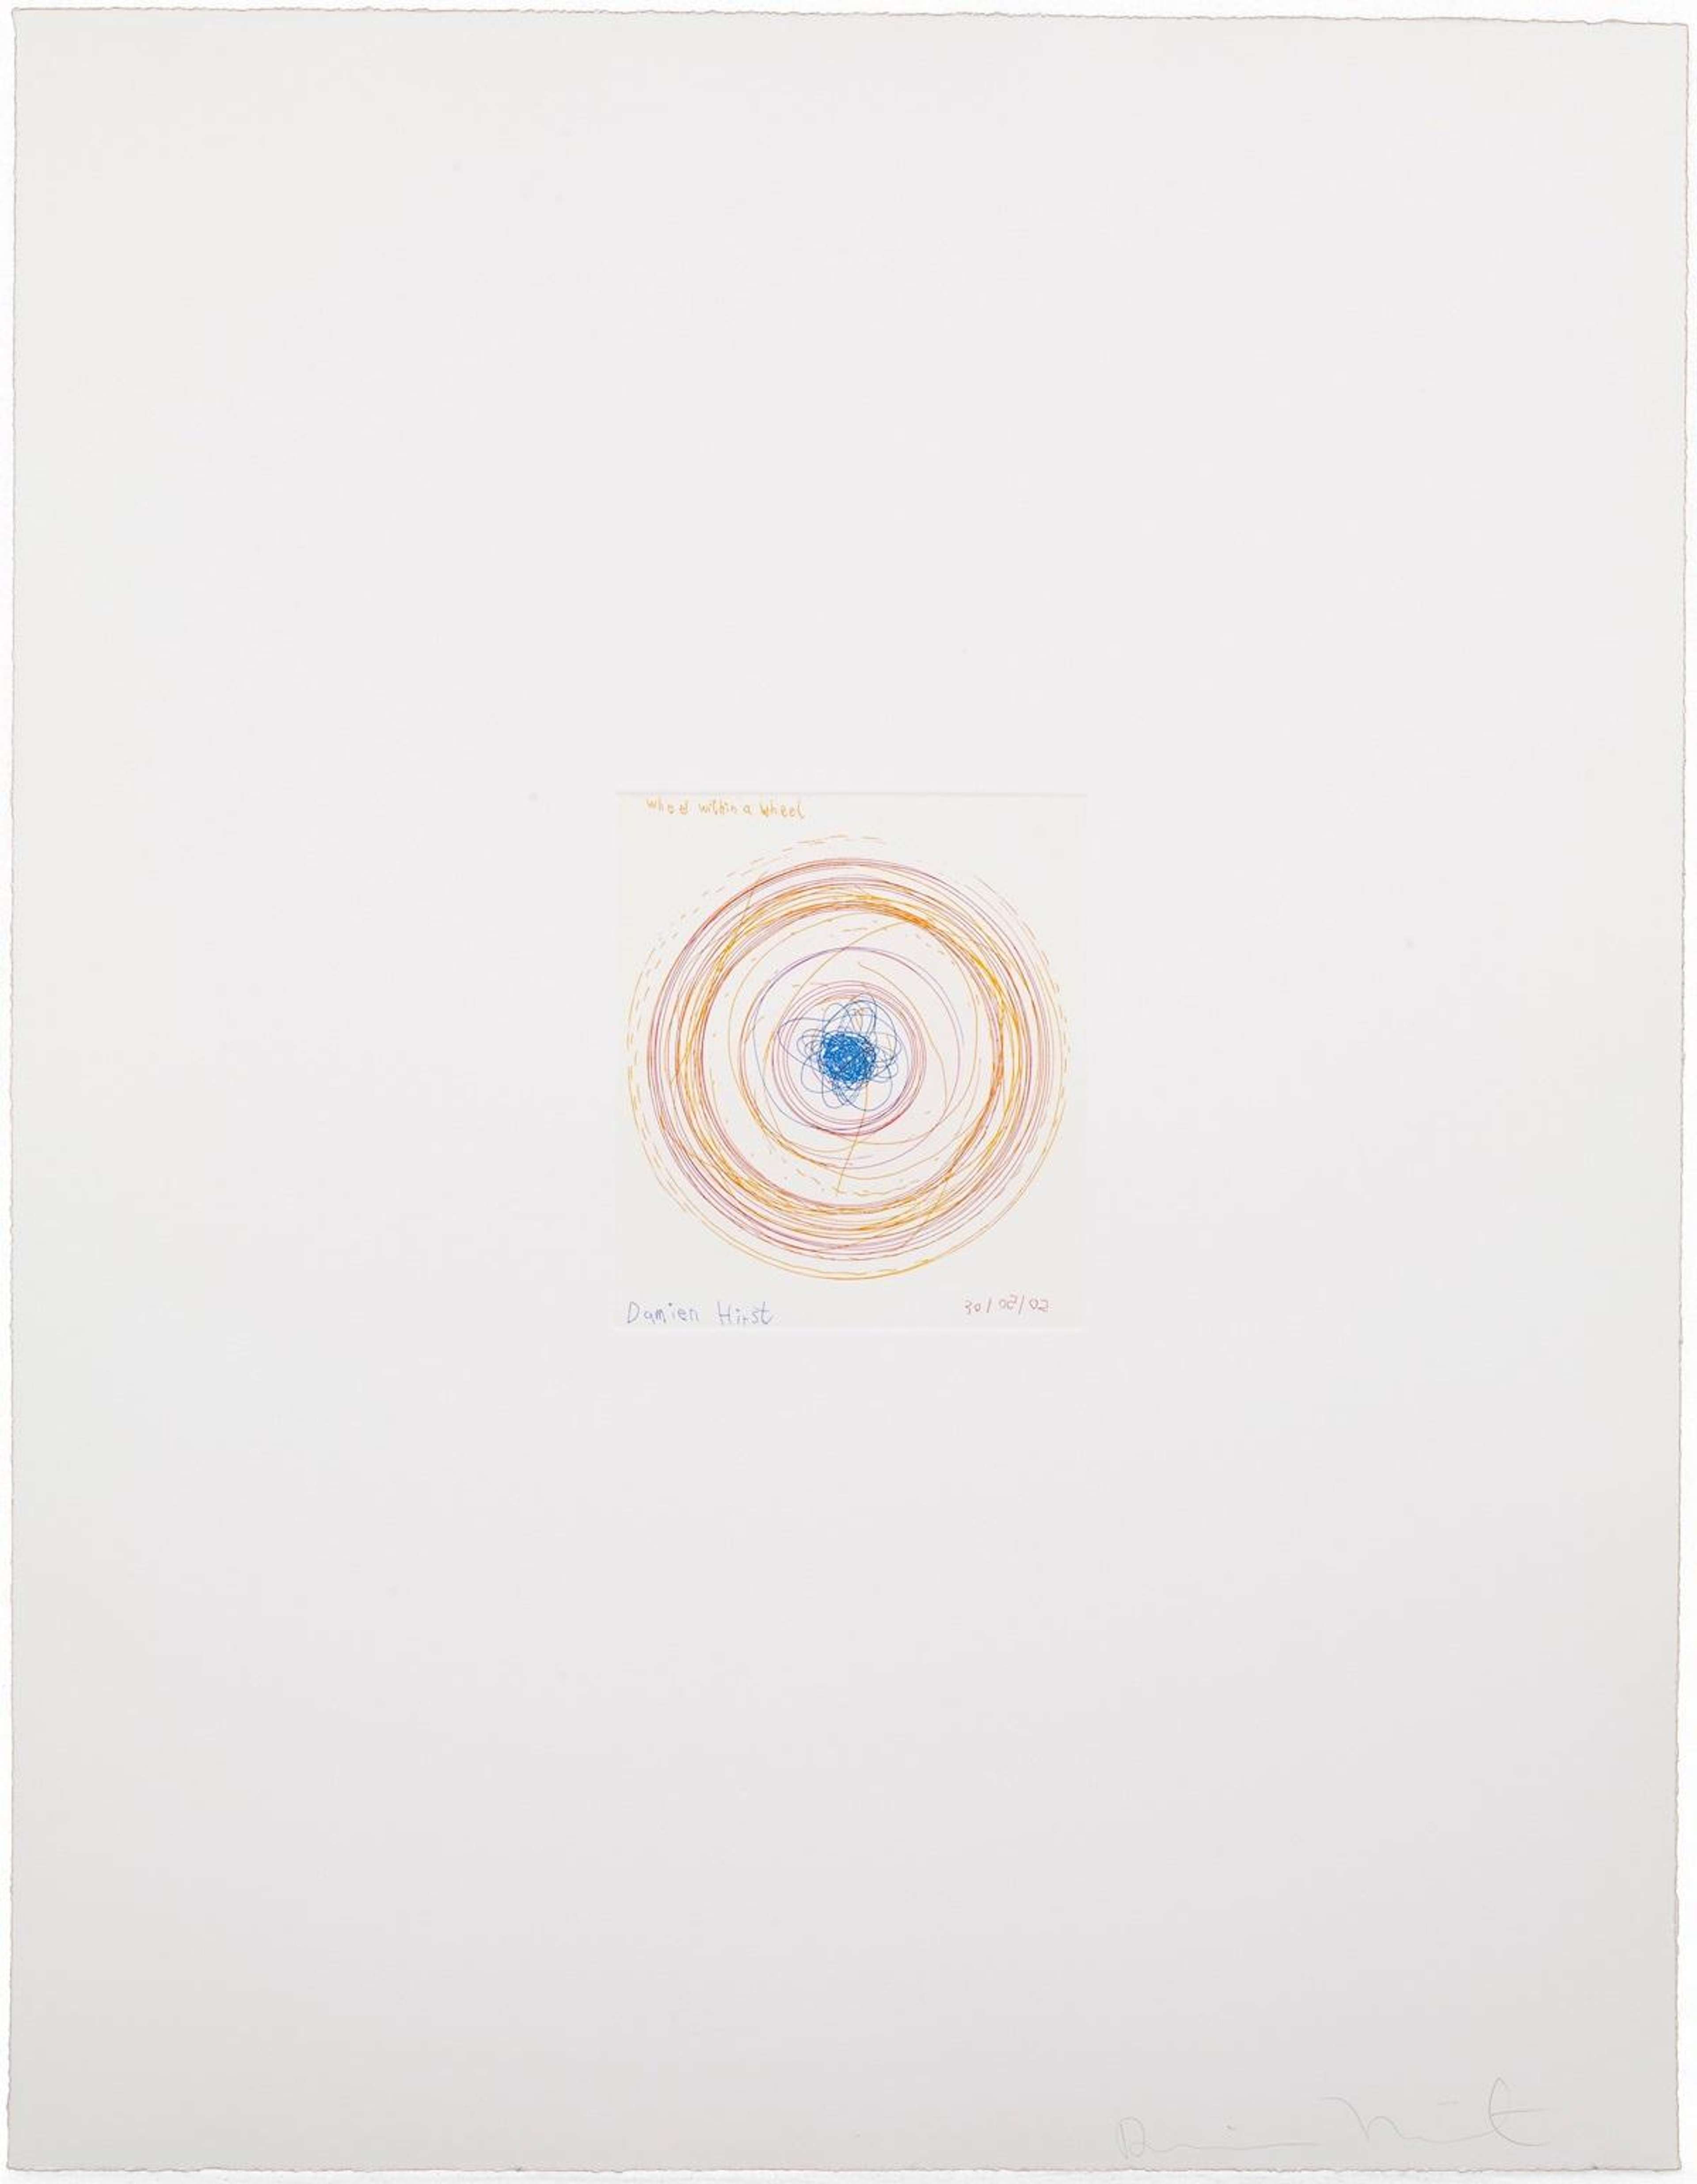 Wheel Within A Wheel - Signed Print by Damien Hirst 2002 - MyArtBroker